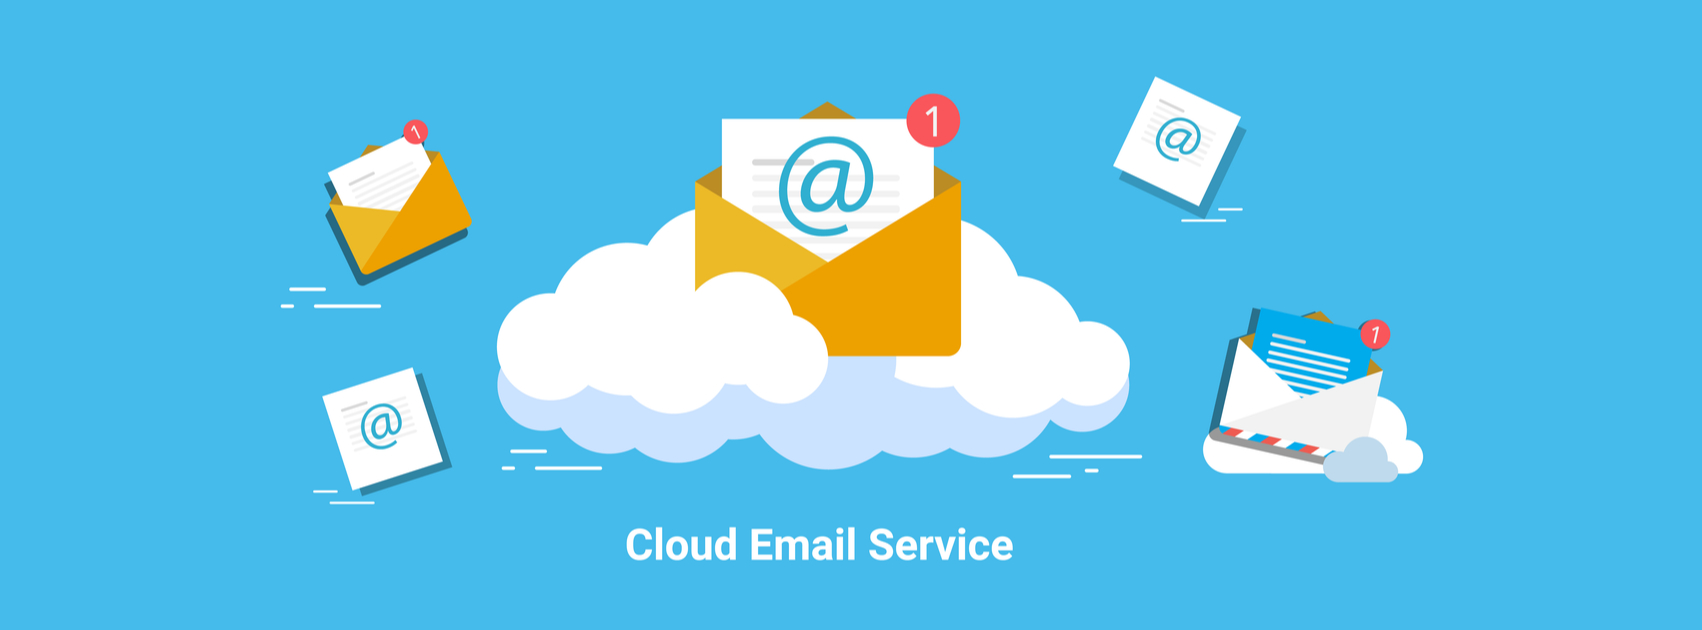 cloud-email-service